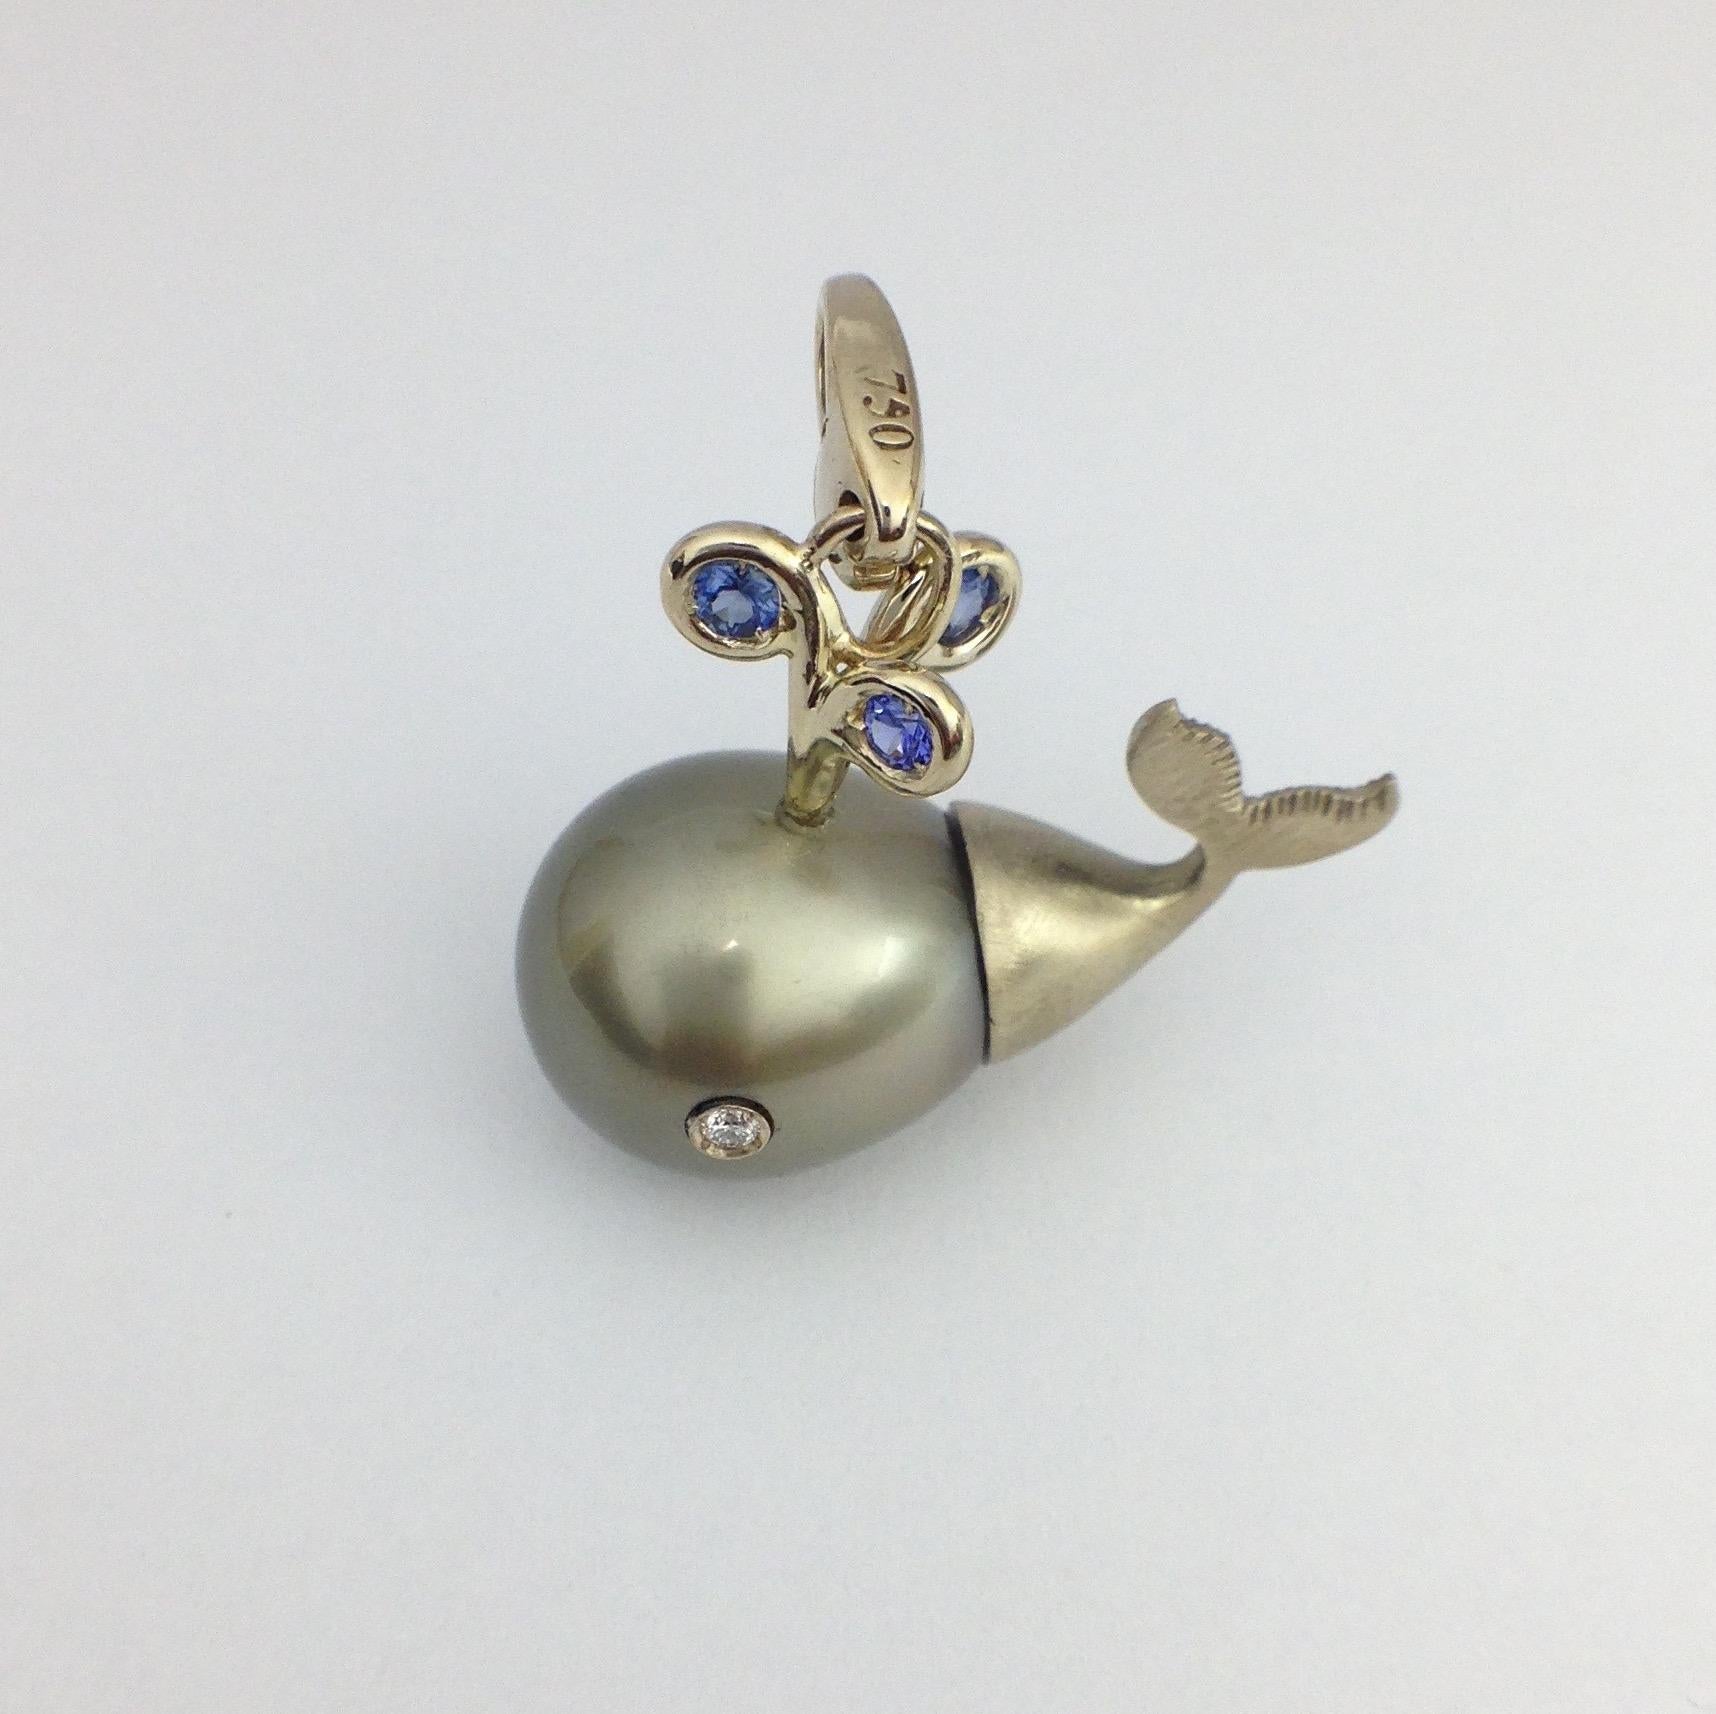 Artisan Petronilla Diamond Blue Sapphire Pearl 18Kt Gold Whale Pendant/Necklace or Charm